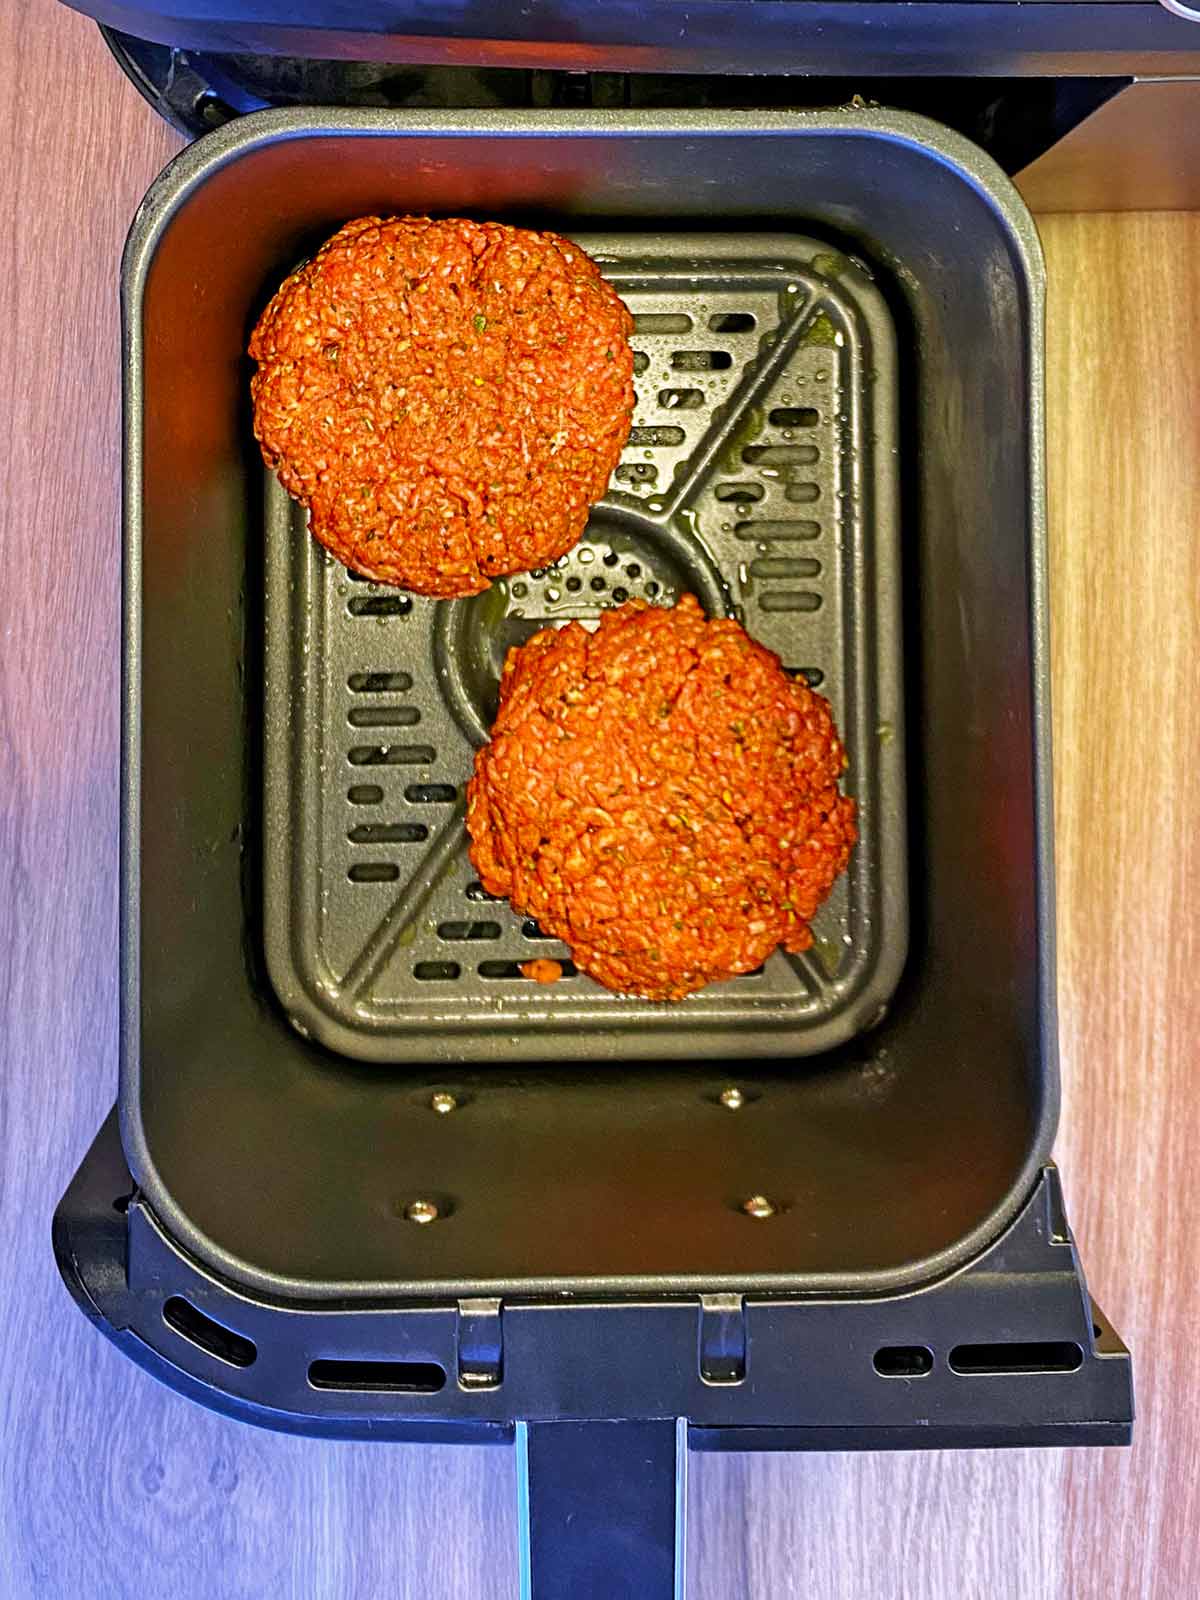 Two uncooked burger patties in an air fryer basket.